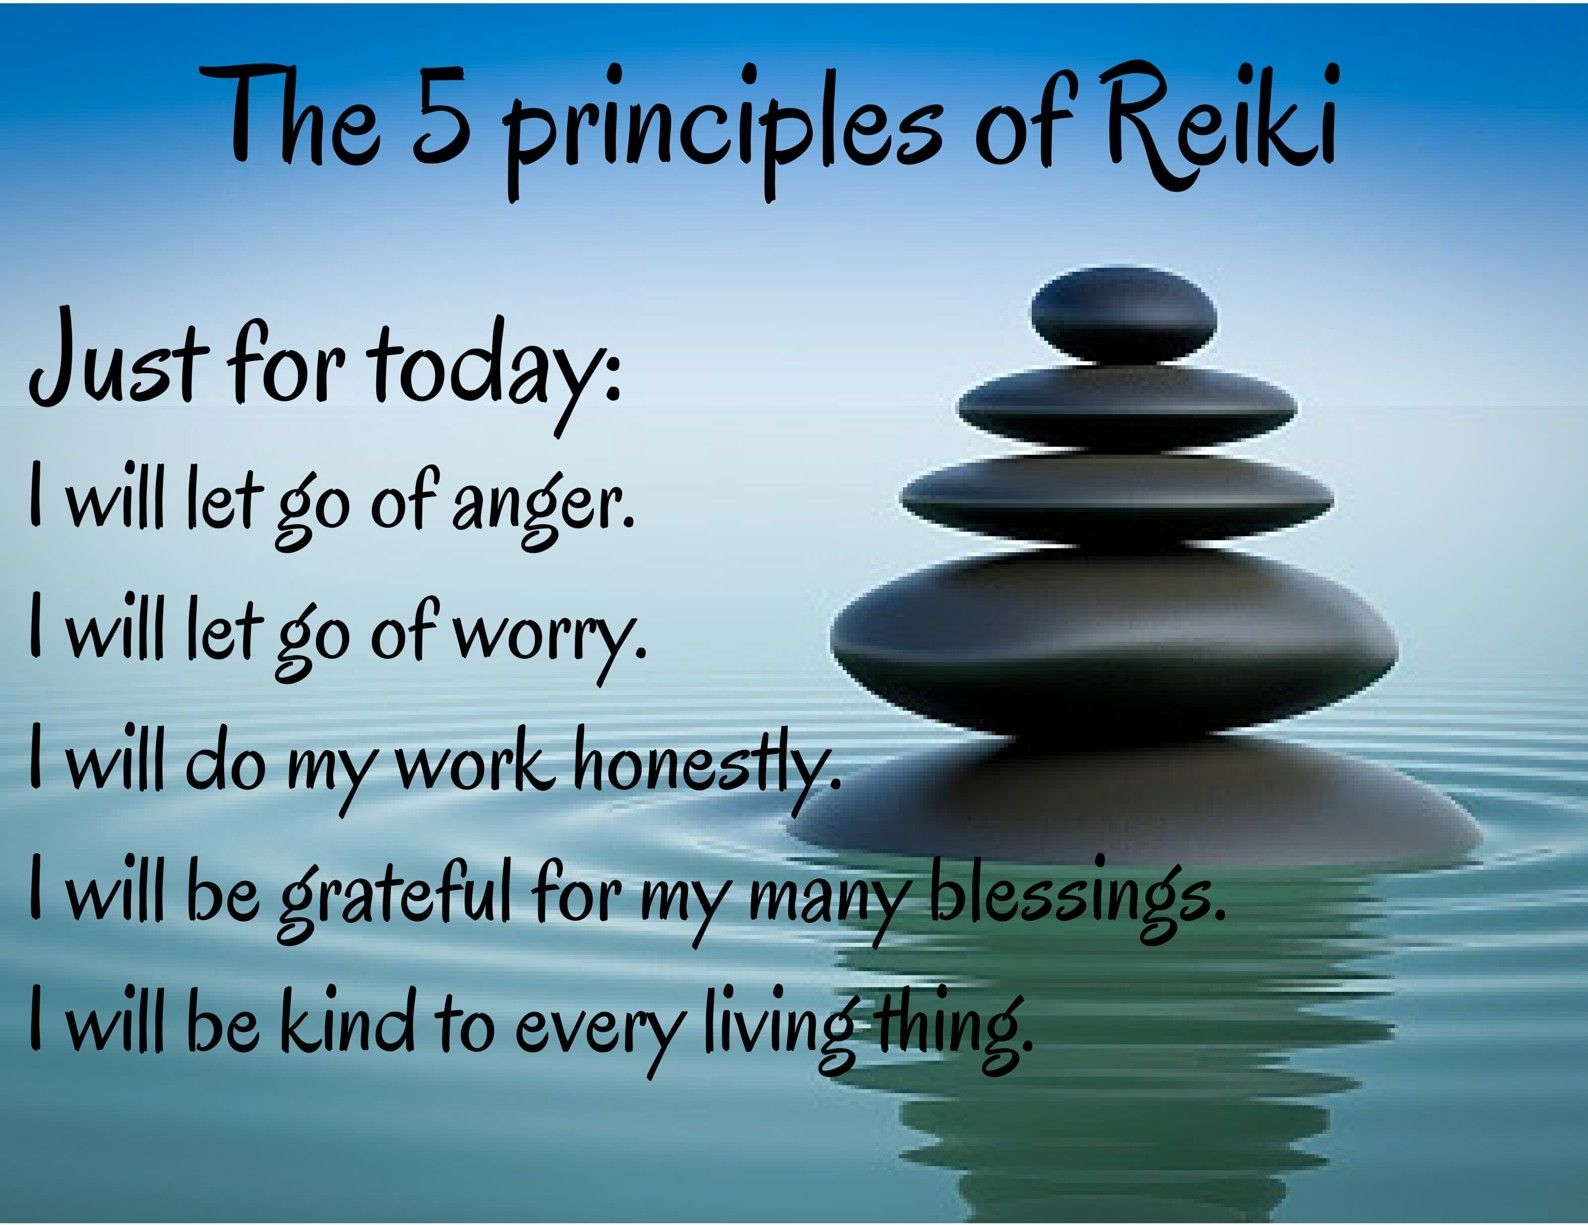 Sit In Gassho Every Morning And Evening Pray Silently Chant Daily To Improve The Heart mind Mikao Usui Energy Healing Reiki Reiki Principles Reiki Symbols